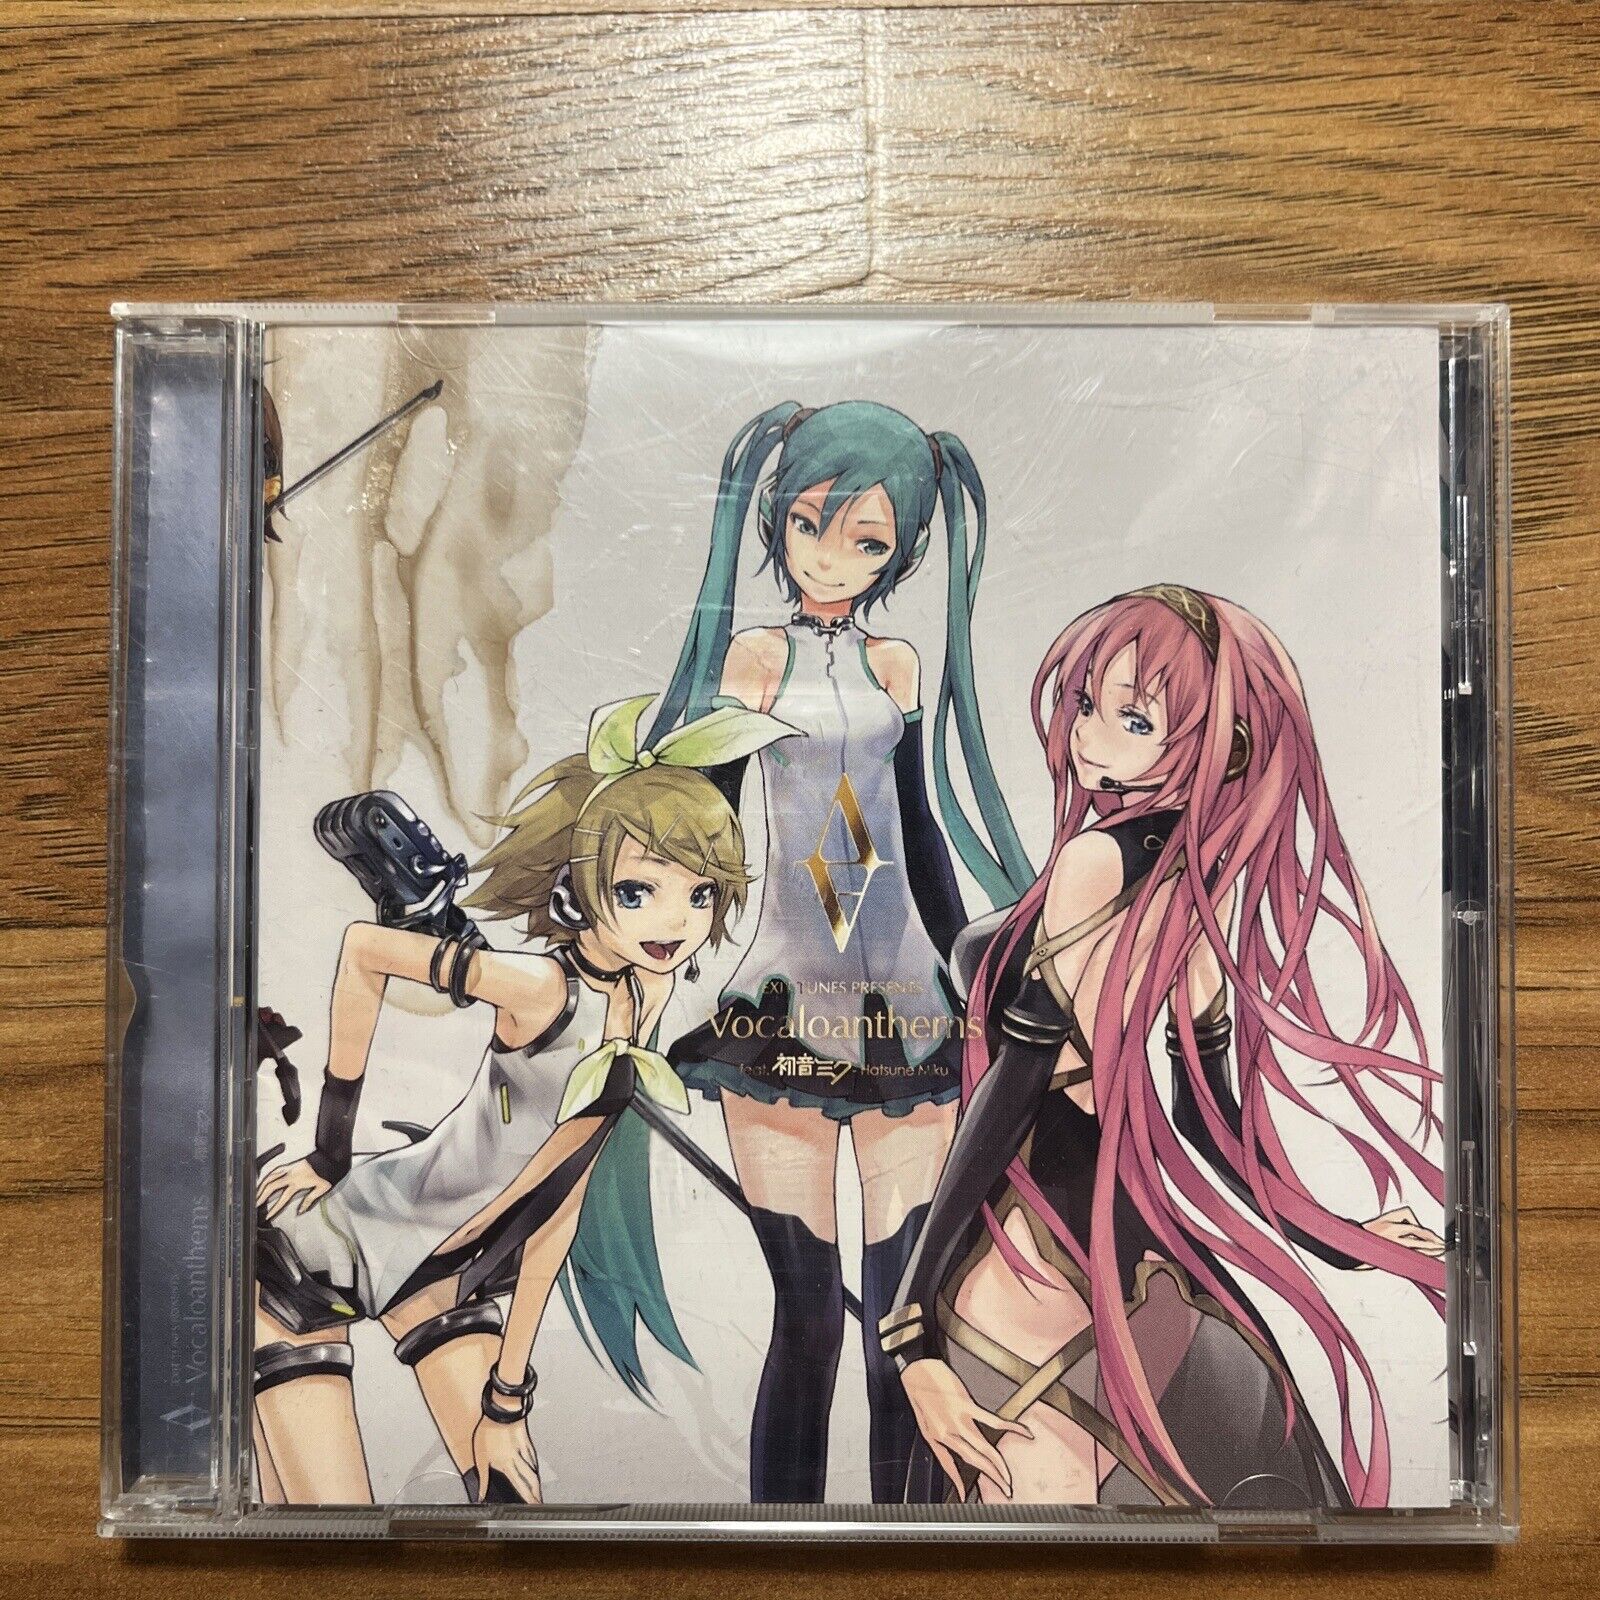 Vocaloanthems Featuring Hatsune Miku / Various by Various Artists (CD, 2010)